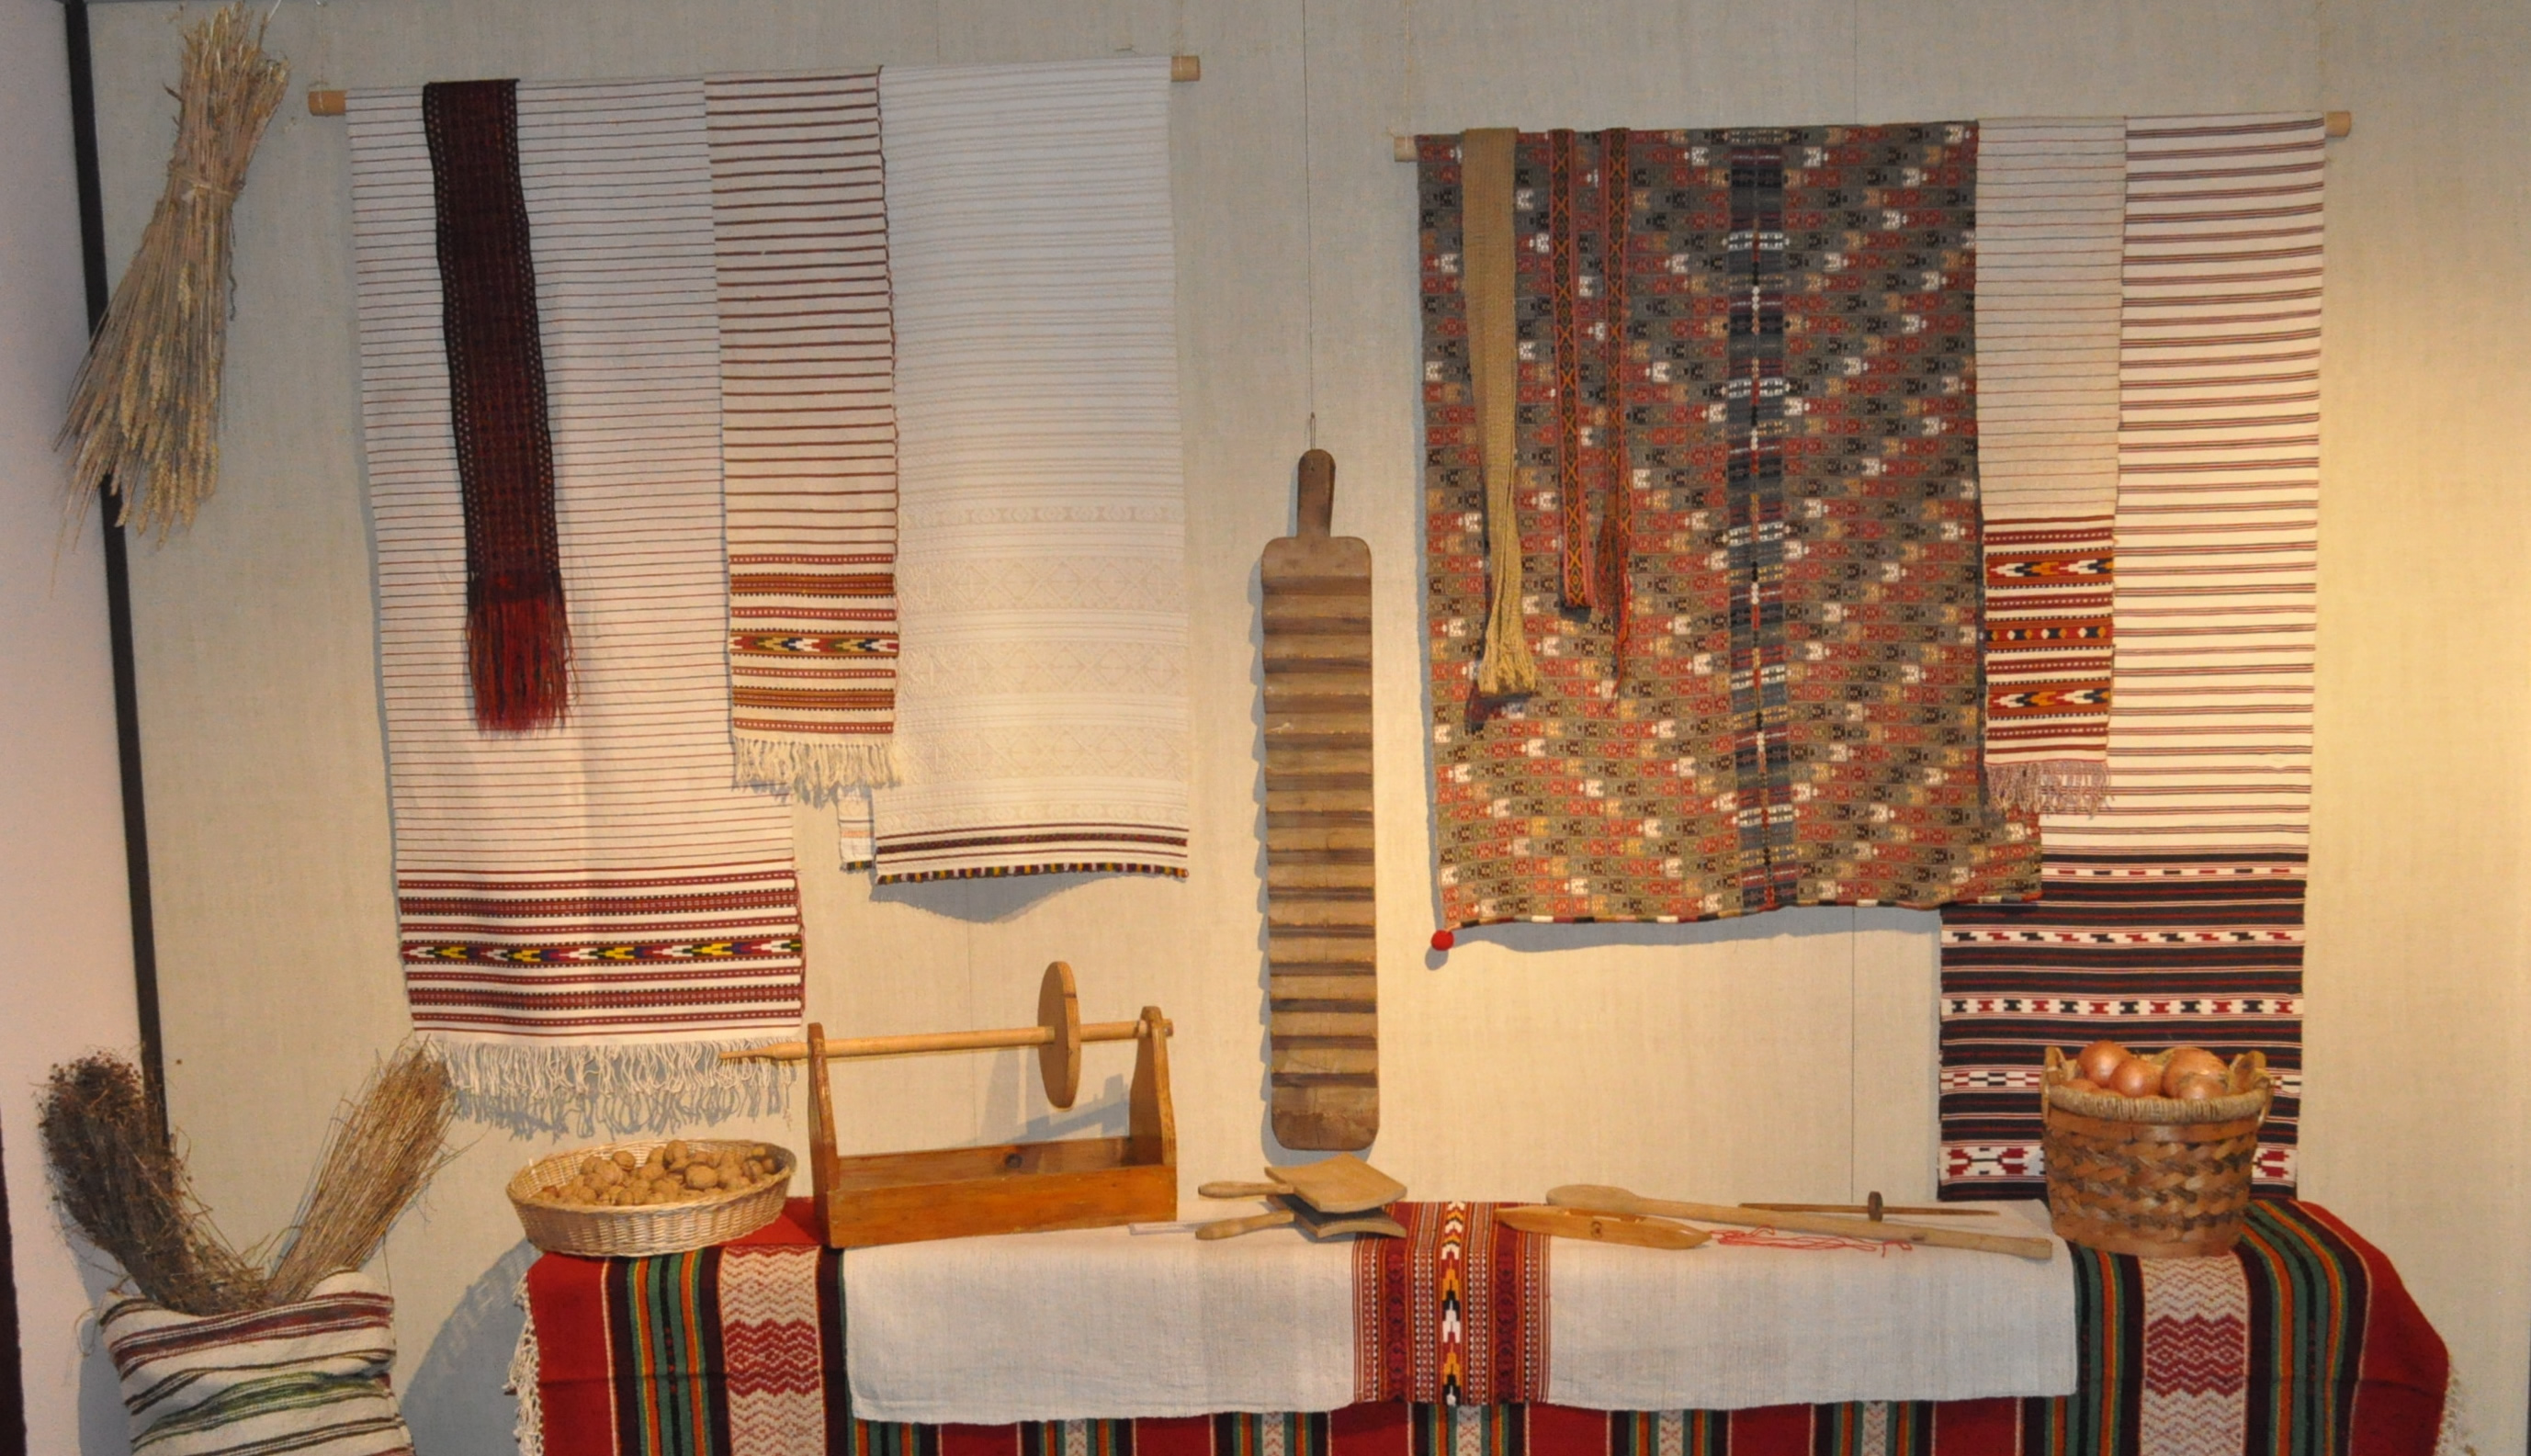 Exhibit of the hand-made tapestry